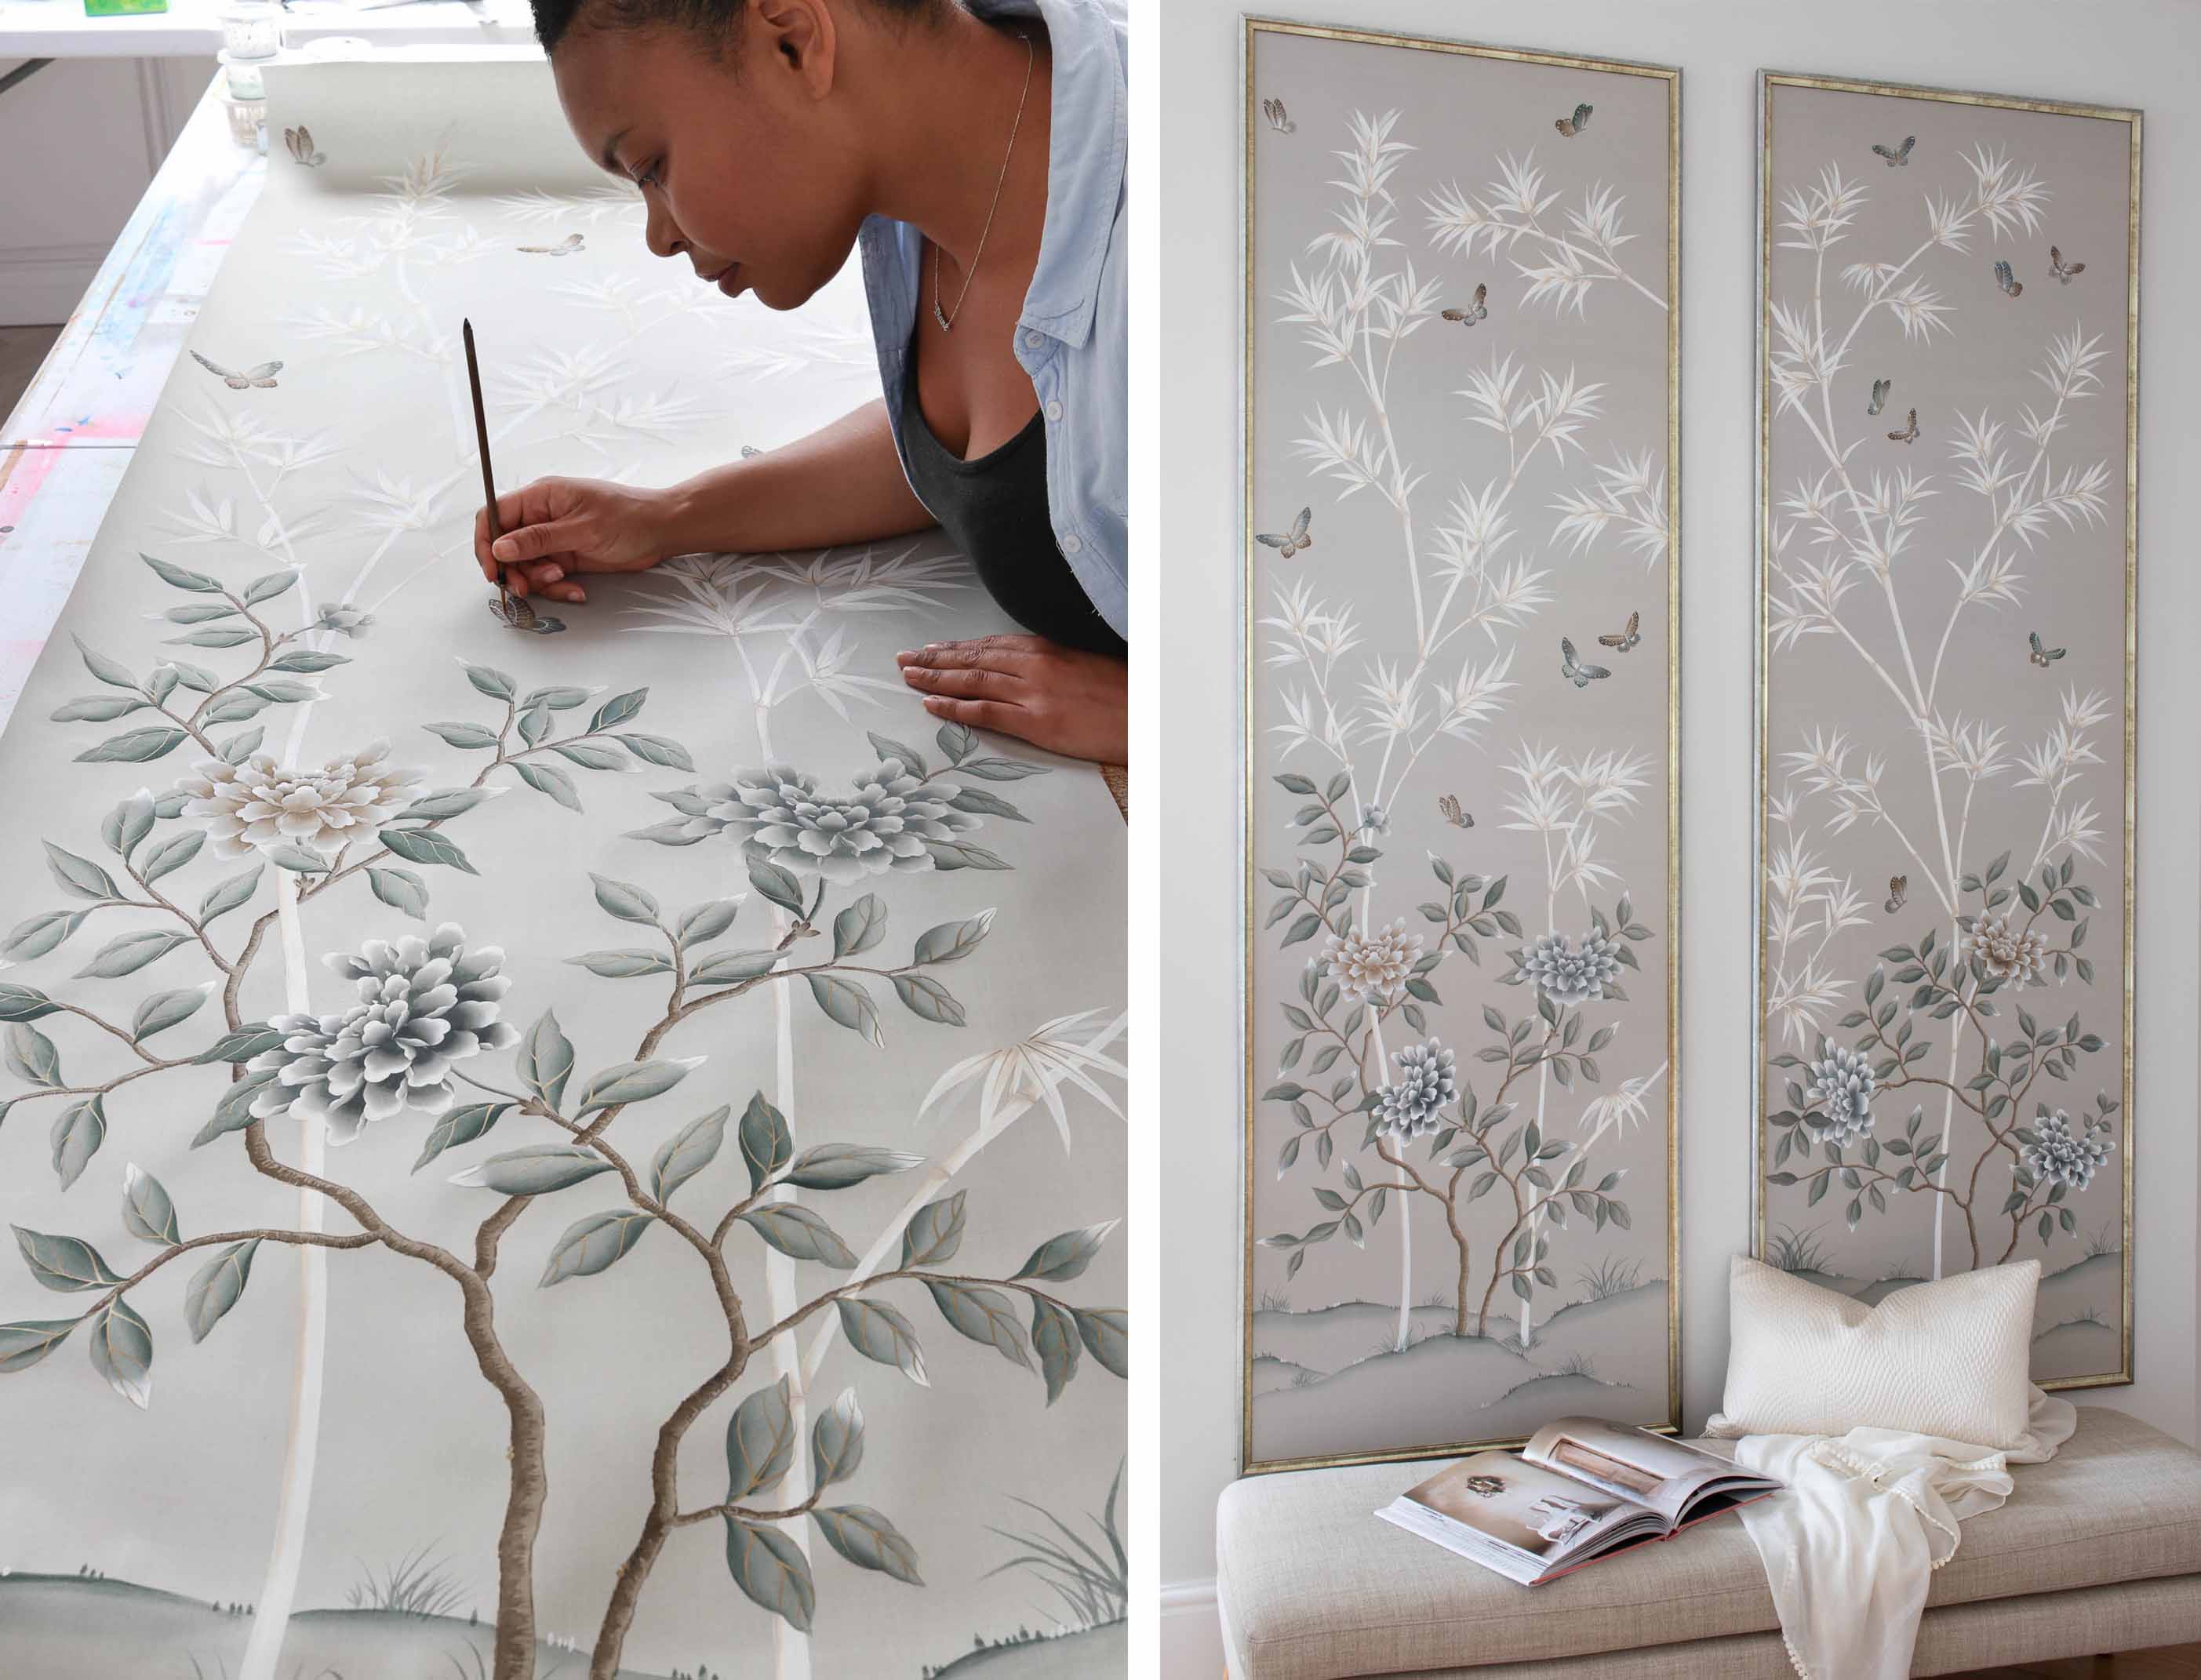 left: diane hill using a natural hair chinoiserie paintbrush for gongbi style art painting original floral chinoiserie design on silk painting paper. right: framed vintage floral chinoiserie wallpaper art print panels